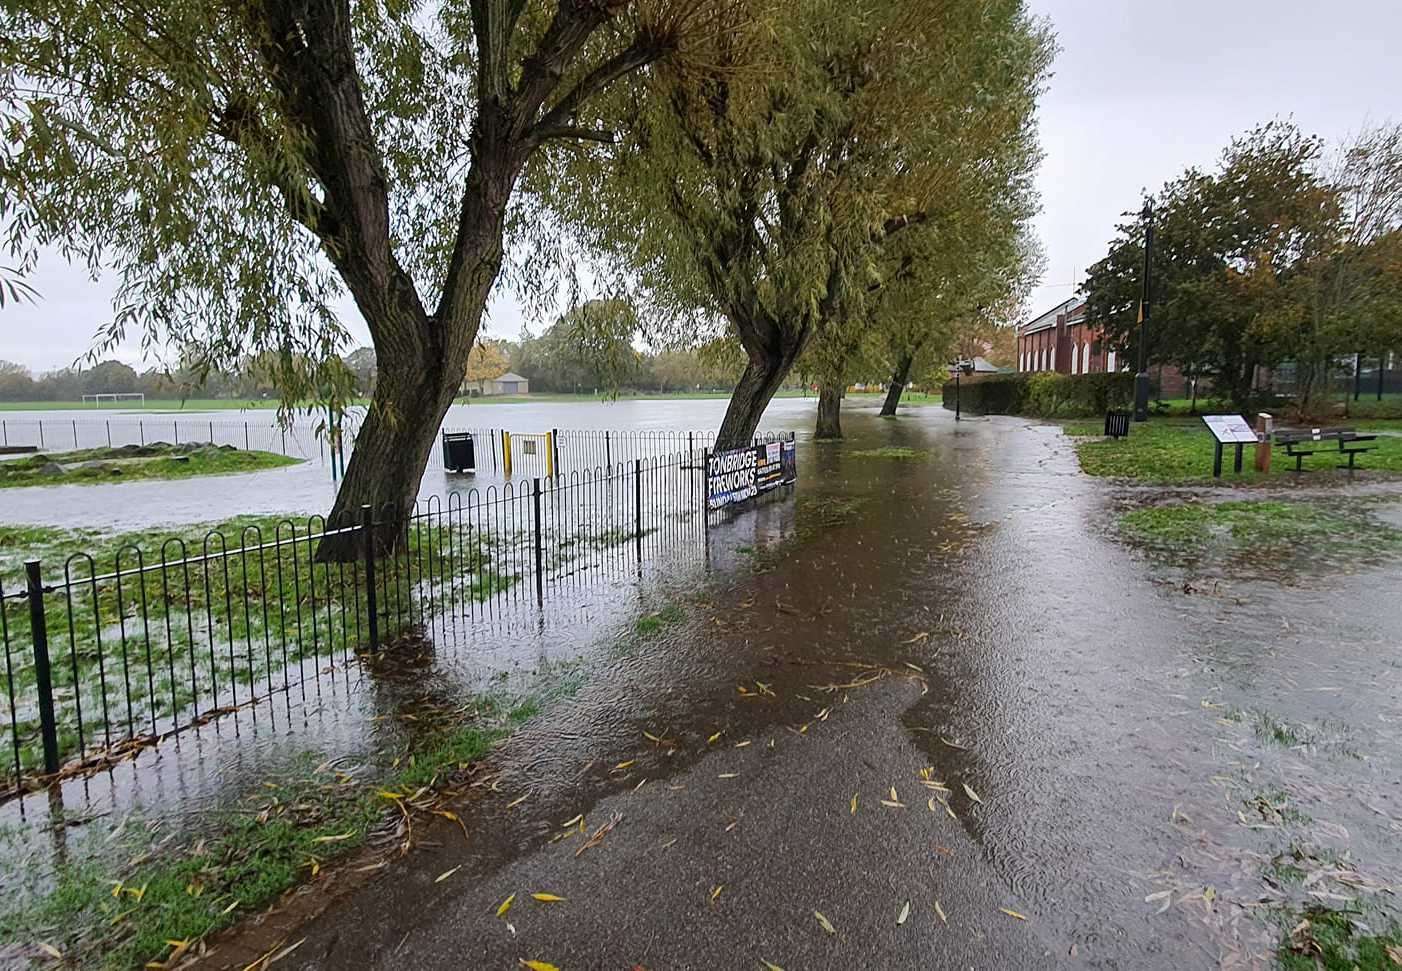 Flooding in Tonbridge Park has led to the postponement of the annual fireworks display organised by Tonbridge Round Table